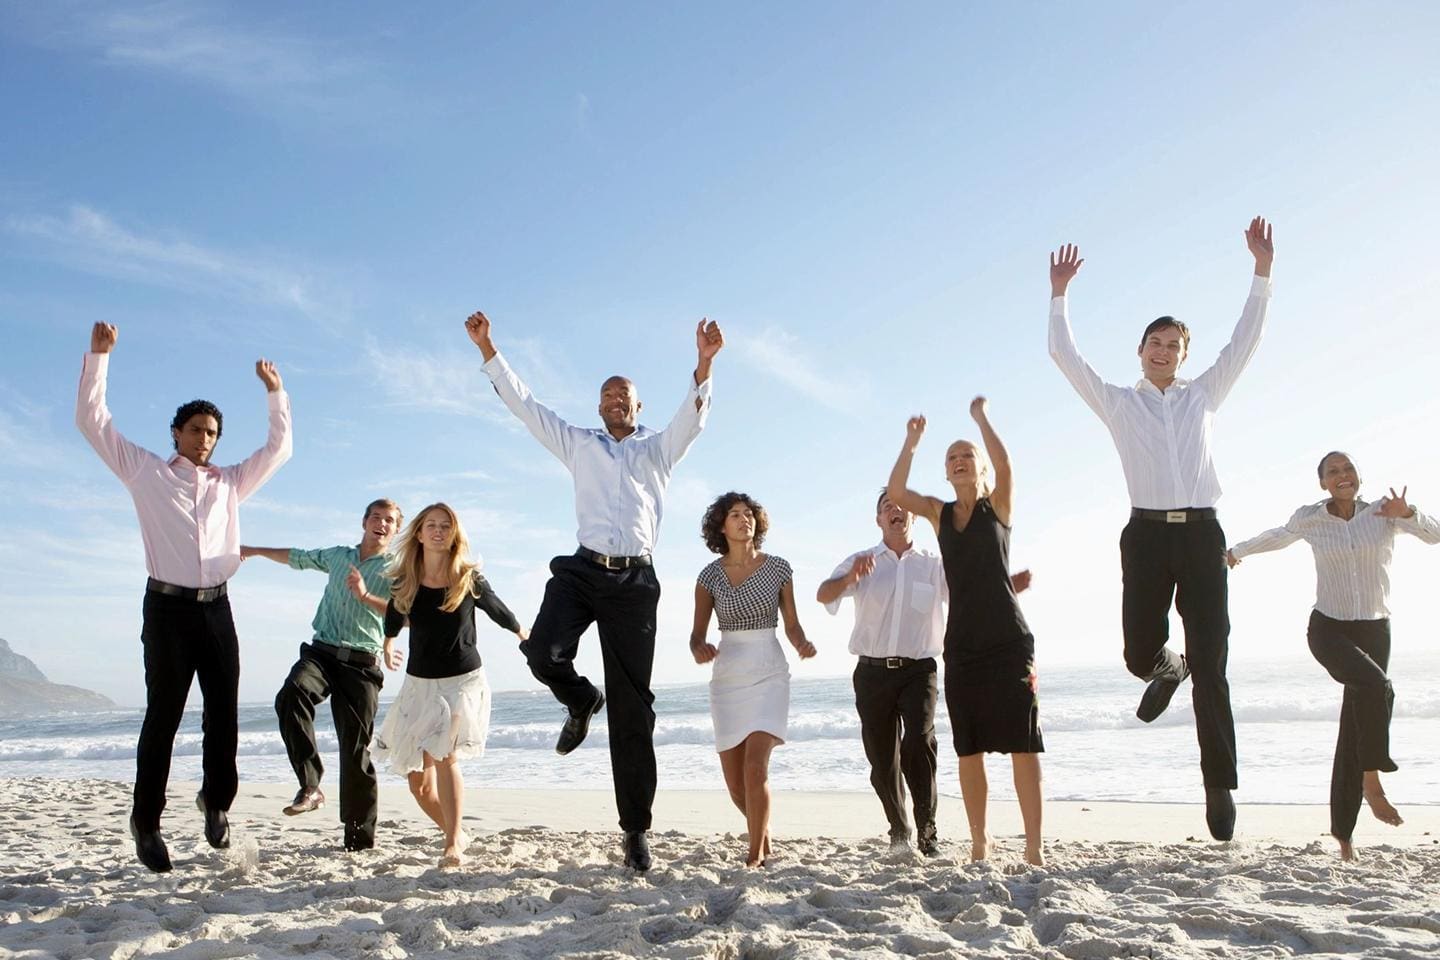 A group of people jumping up in the air on a beach.